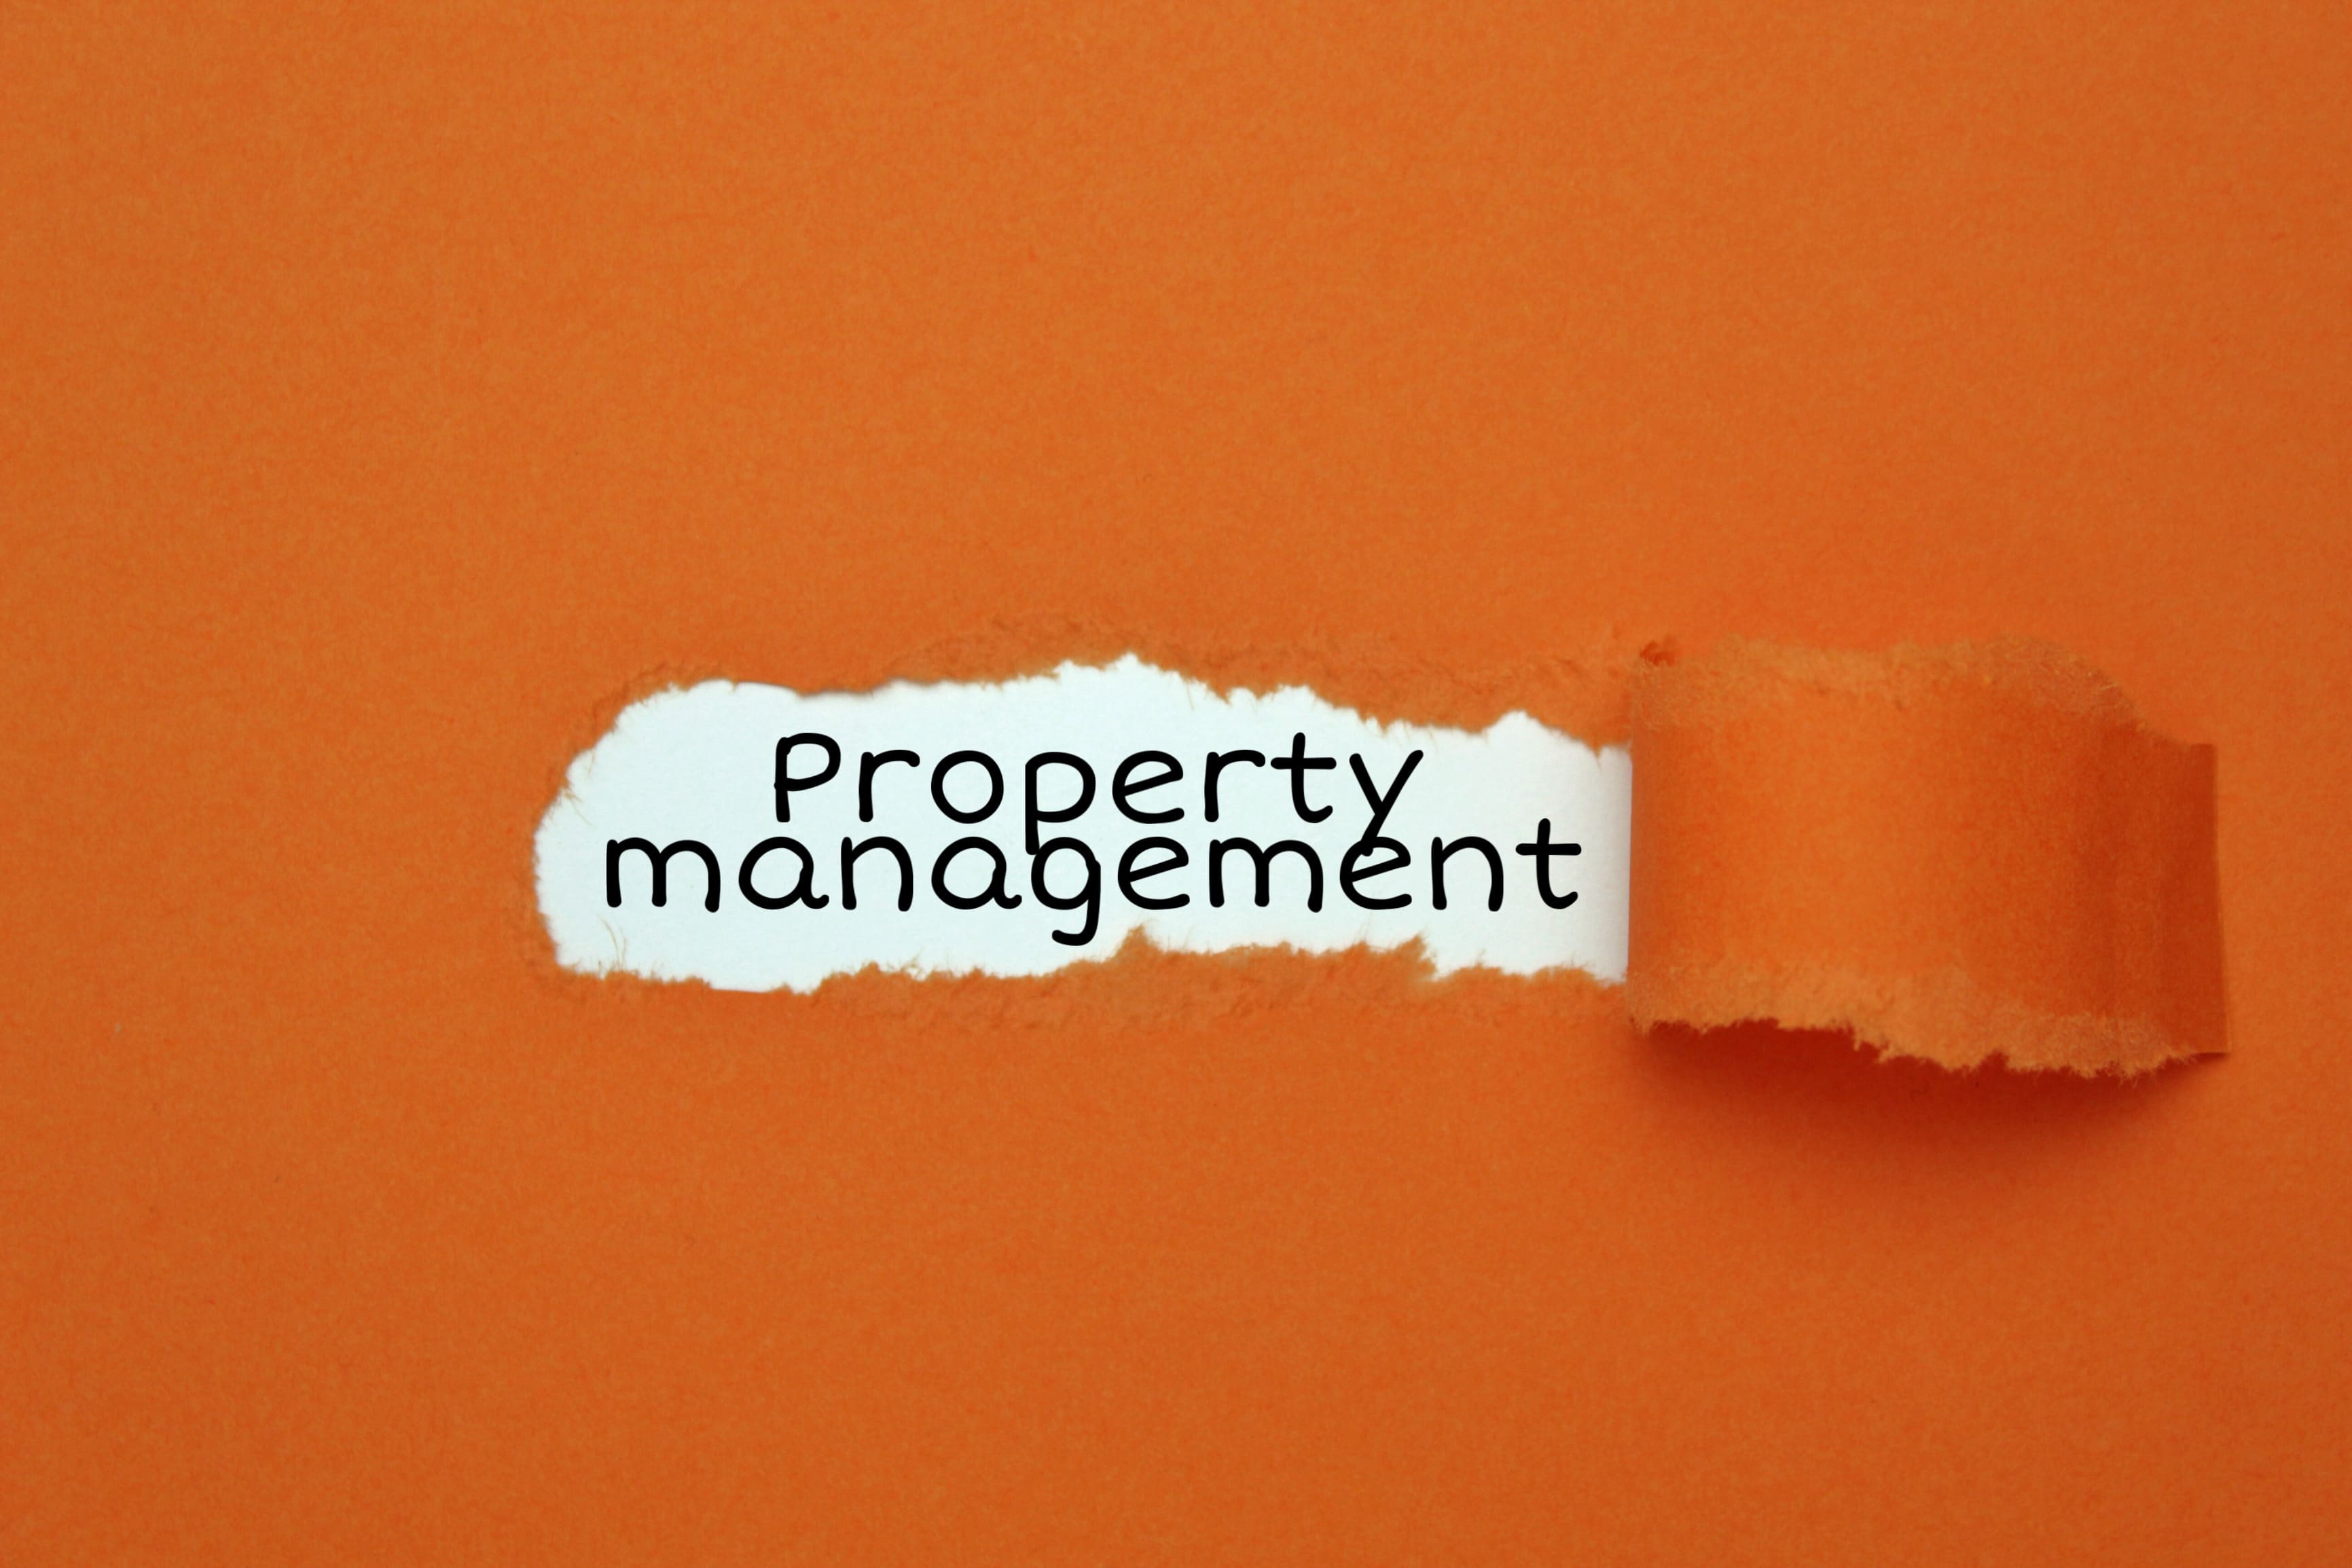 Top Property Management Tips for Maximizing Your Rental Investment Properties